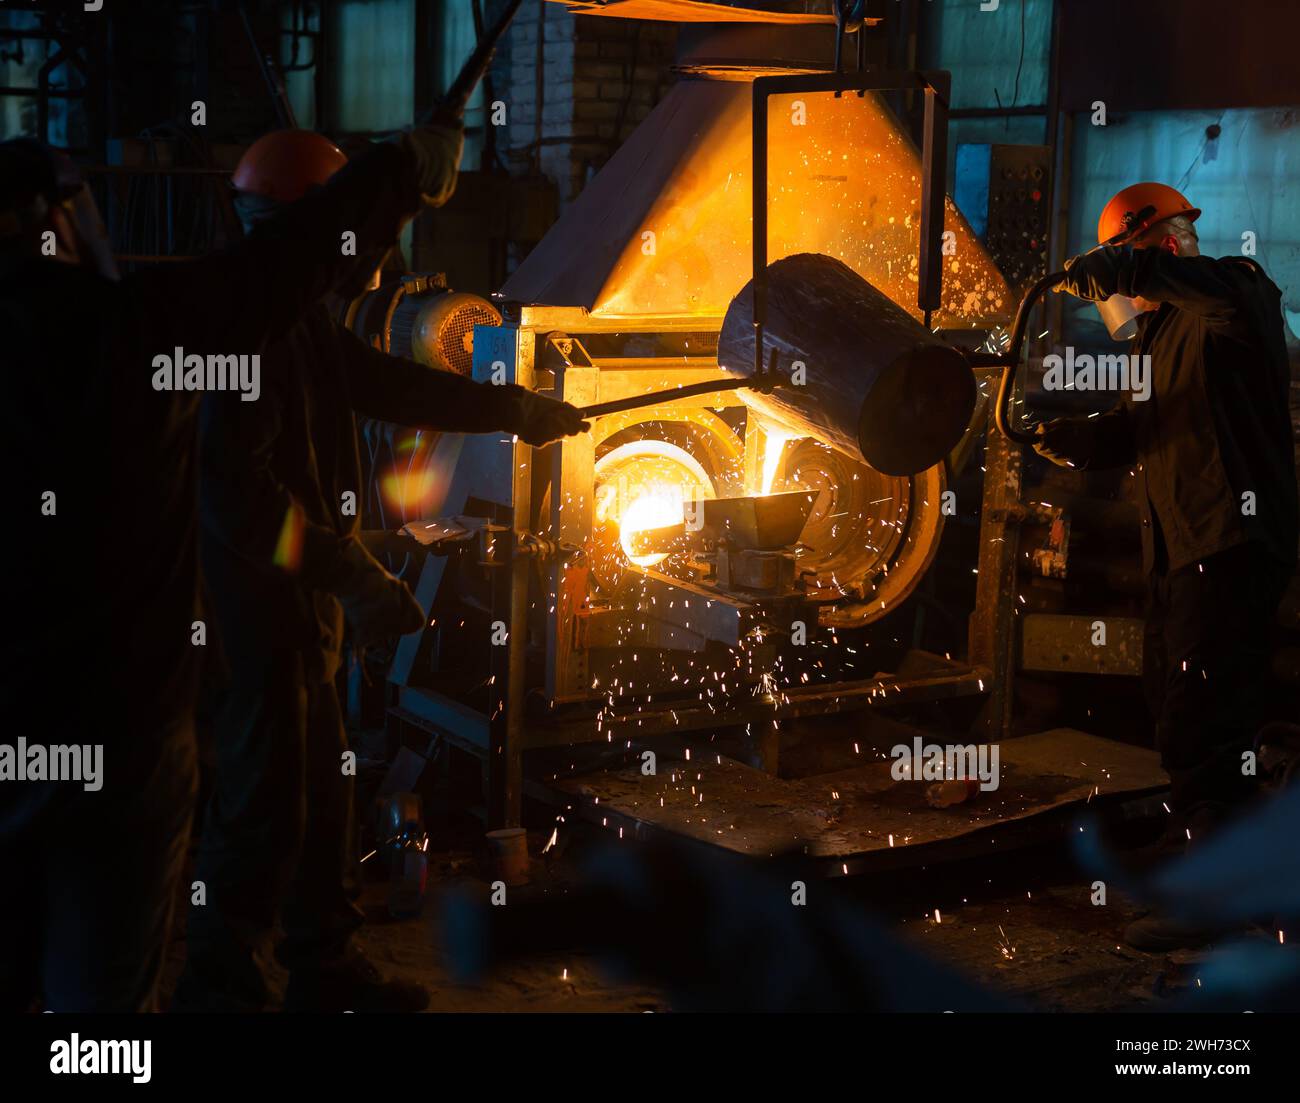 Pouring molten metal into a centrifugal machine in the foundry shop of metallurgical plant Stock Photo